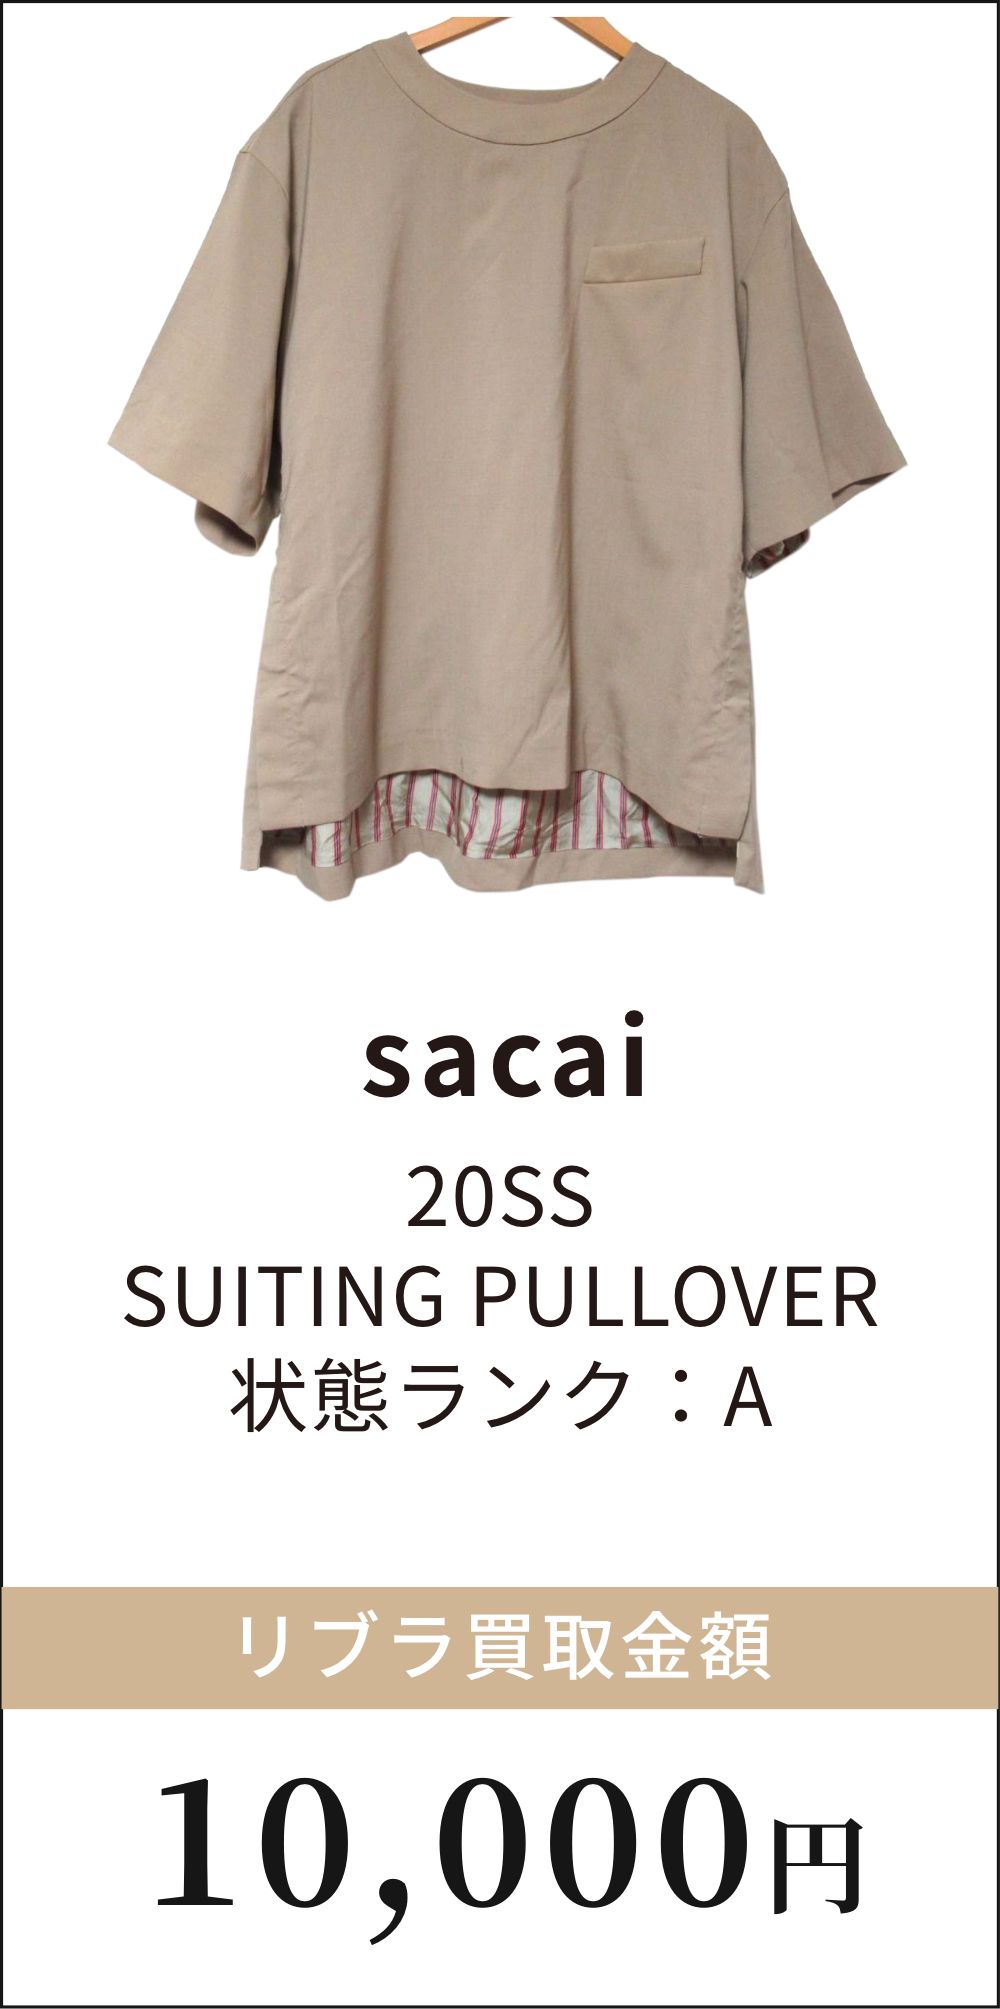 sacai 20SS SUITING PULLOVER